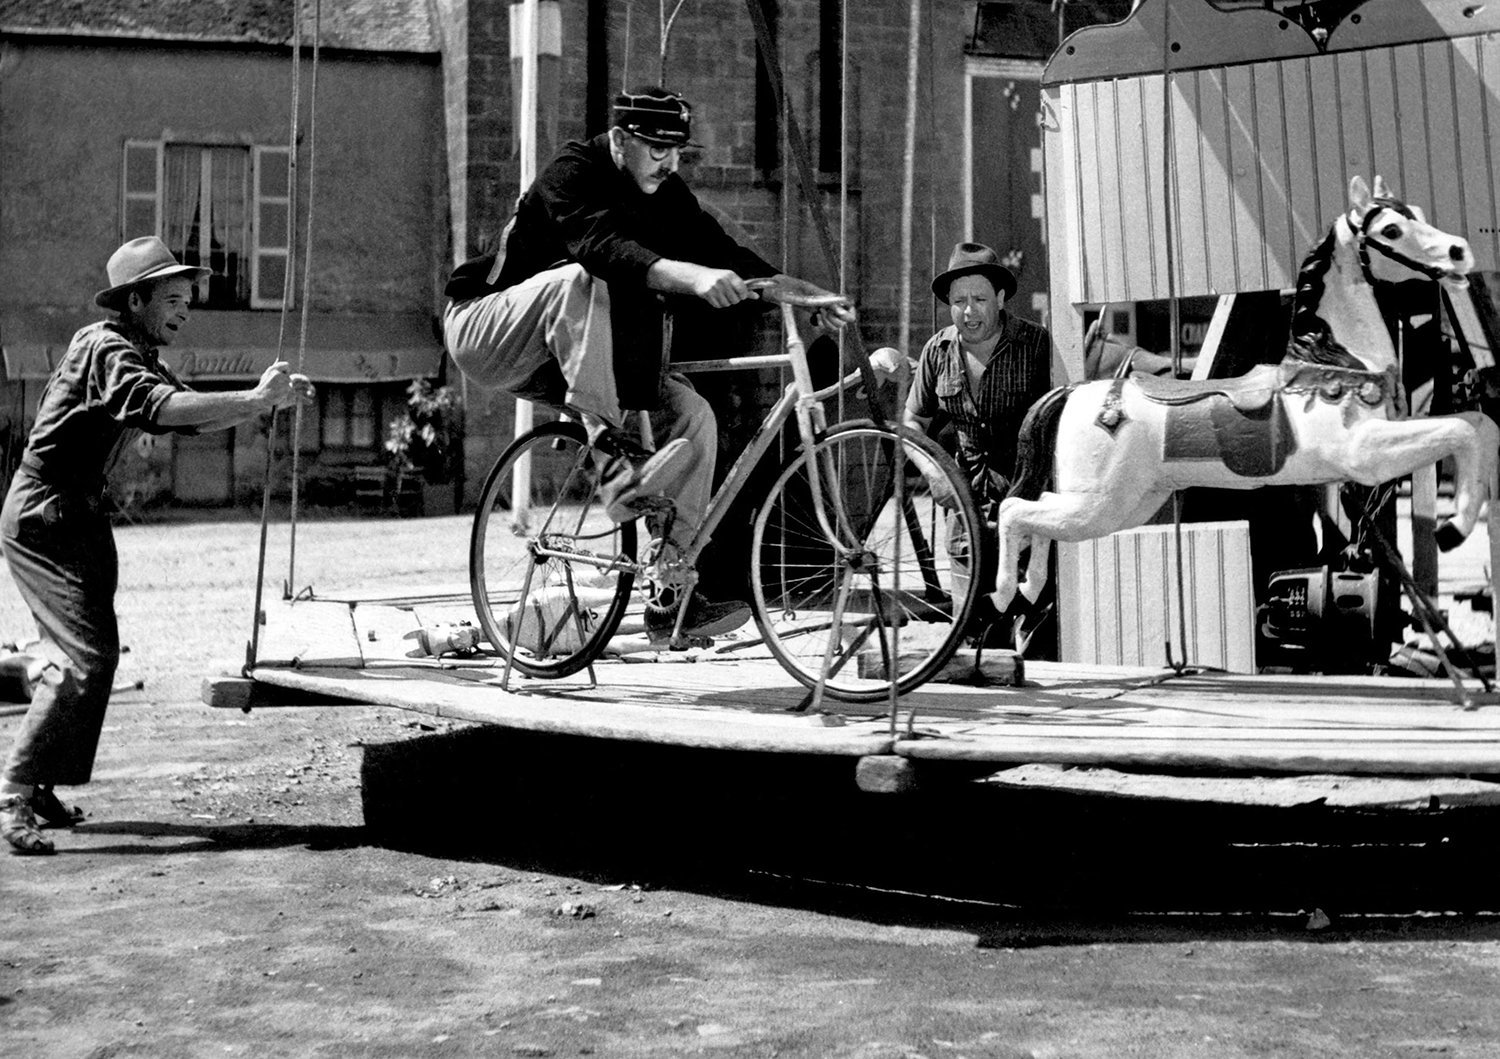 Bicycles, cinema and the spectacle of mechanical movement